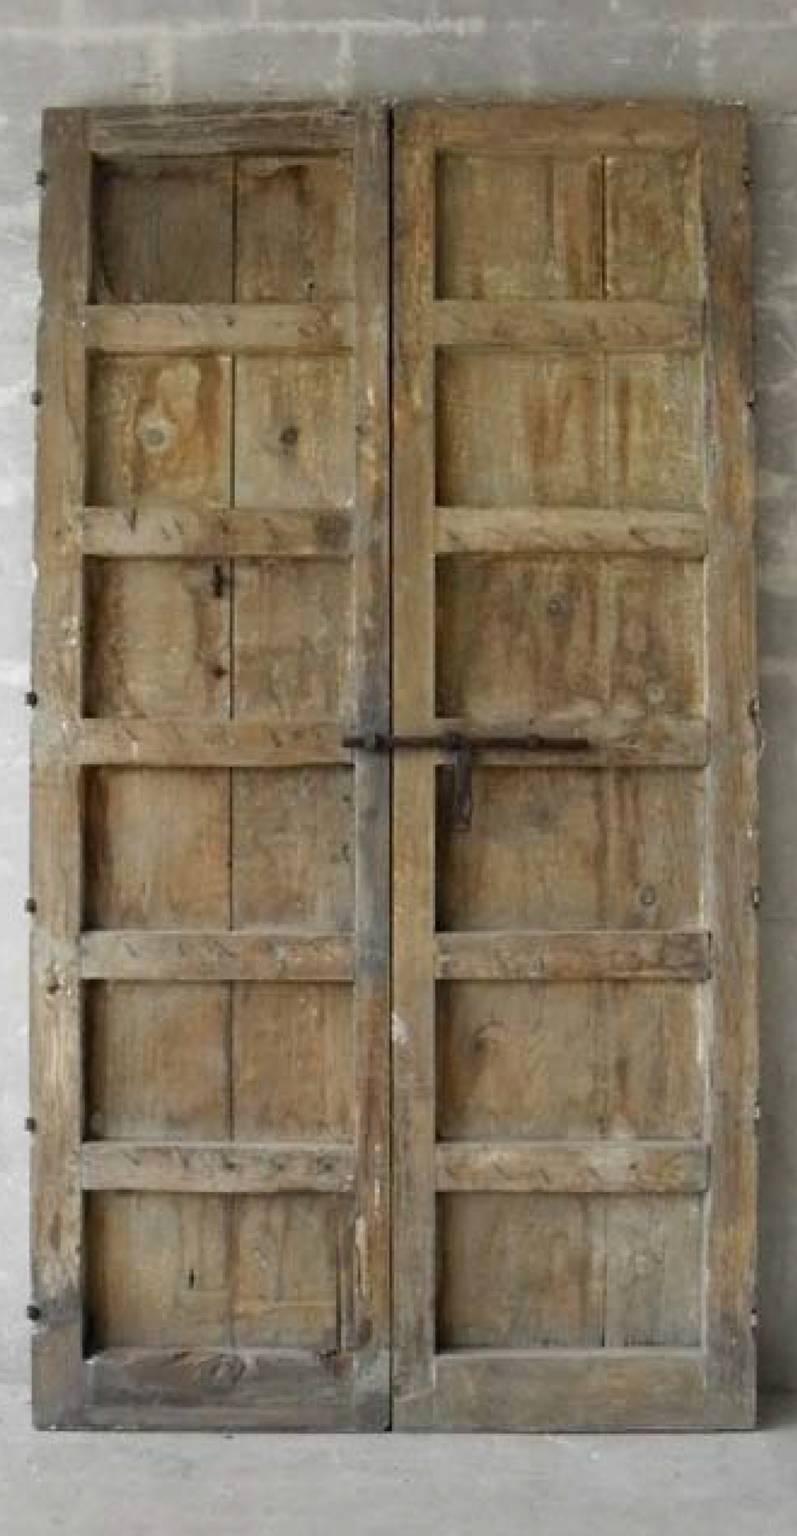 This is a grand pair of antique 18th century entrance doors from Andalusia, Spain. They stand very tall, perfect for any entrance. They also include original hardware - nails, enormous knocker, and hinges. They are made of natural wood, so they have